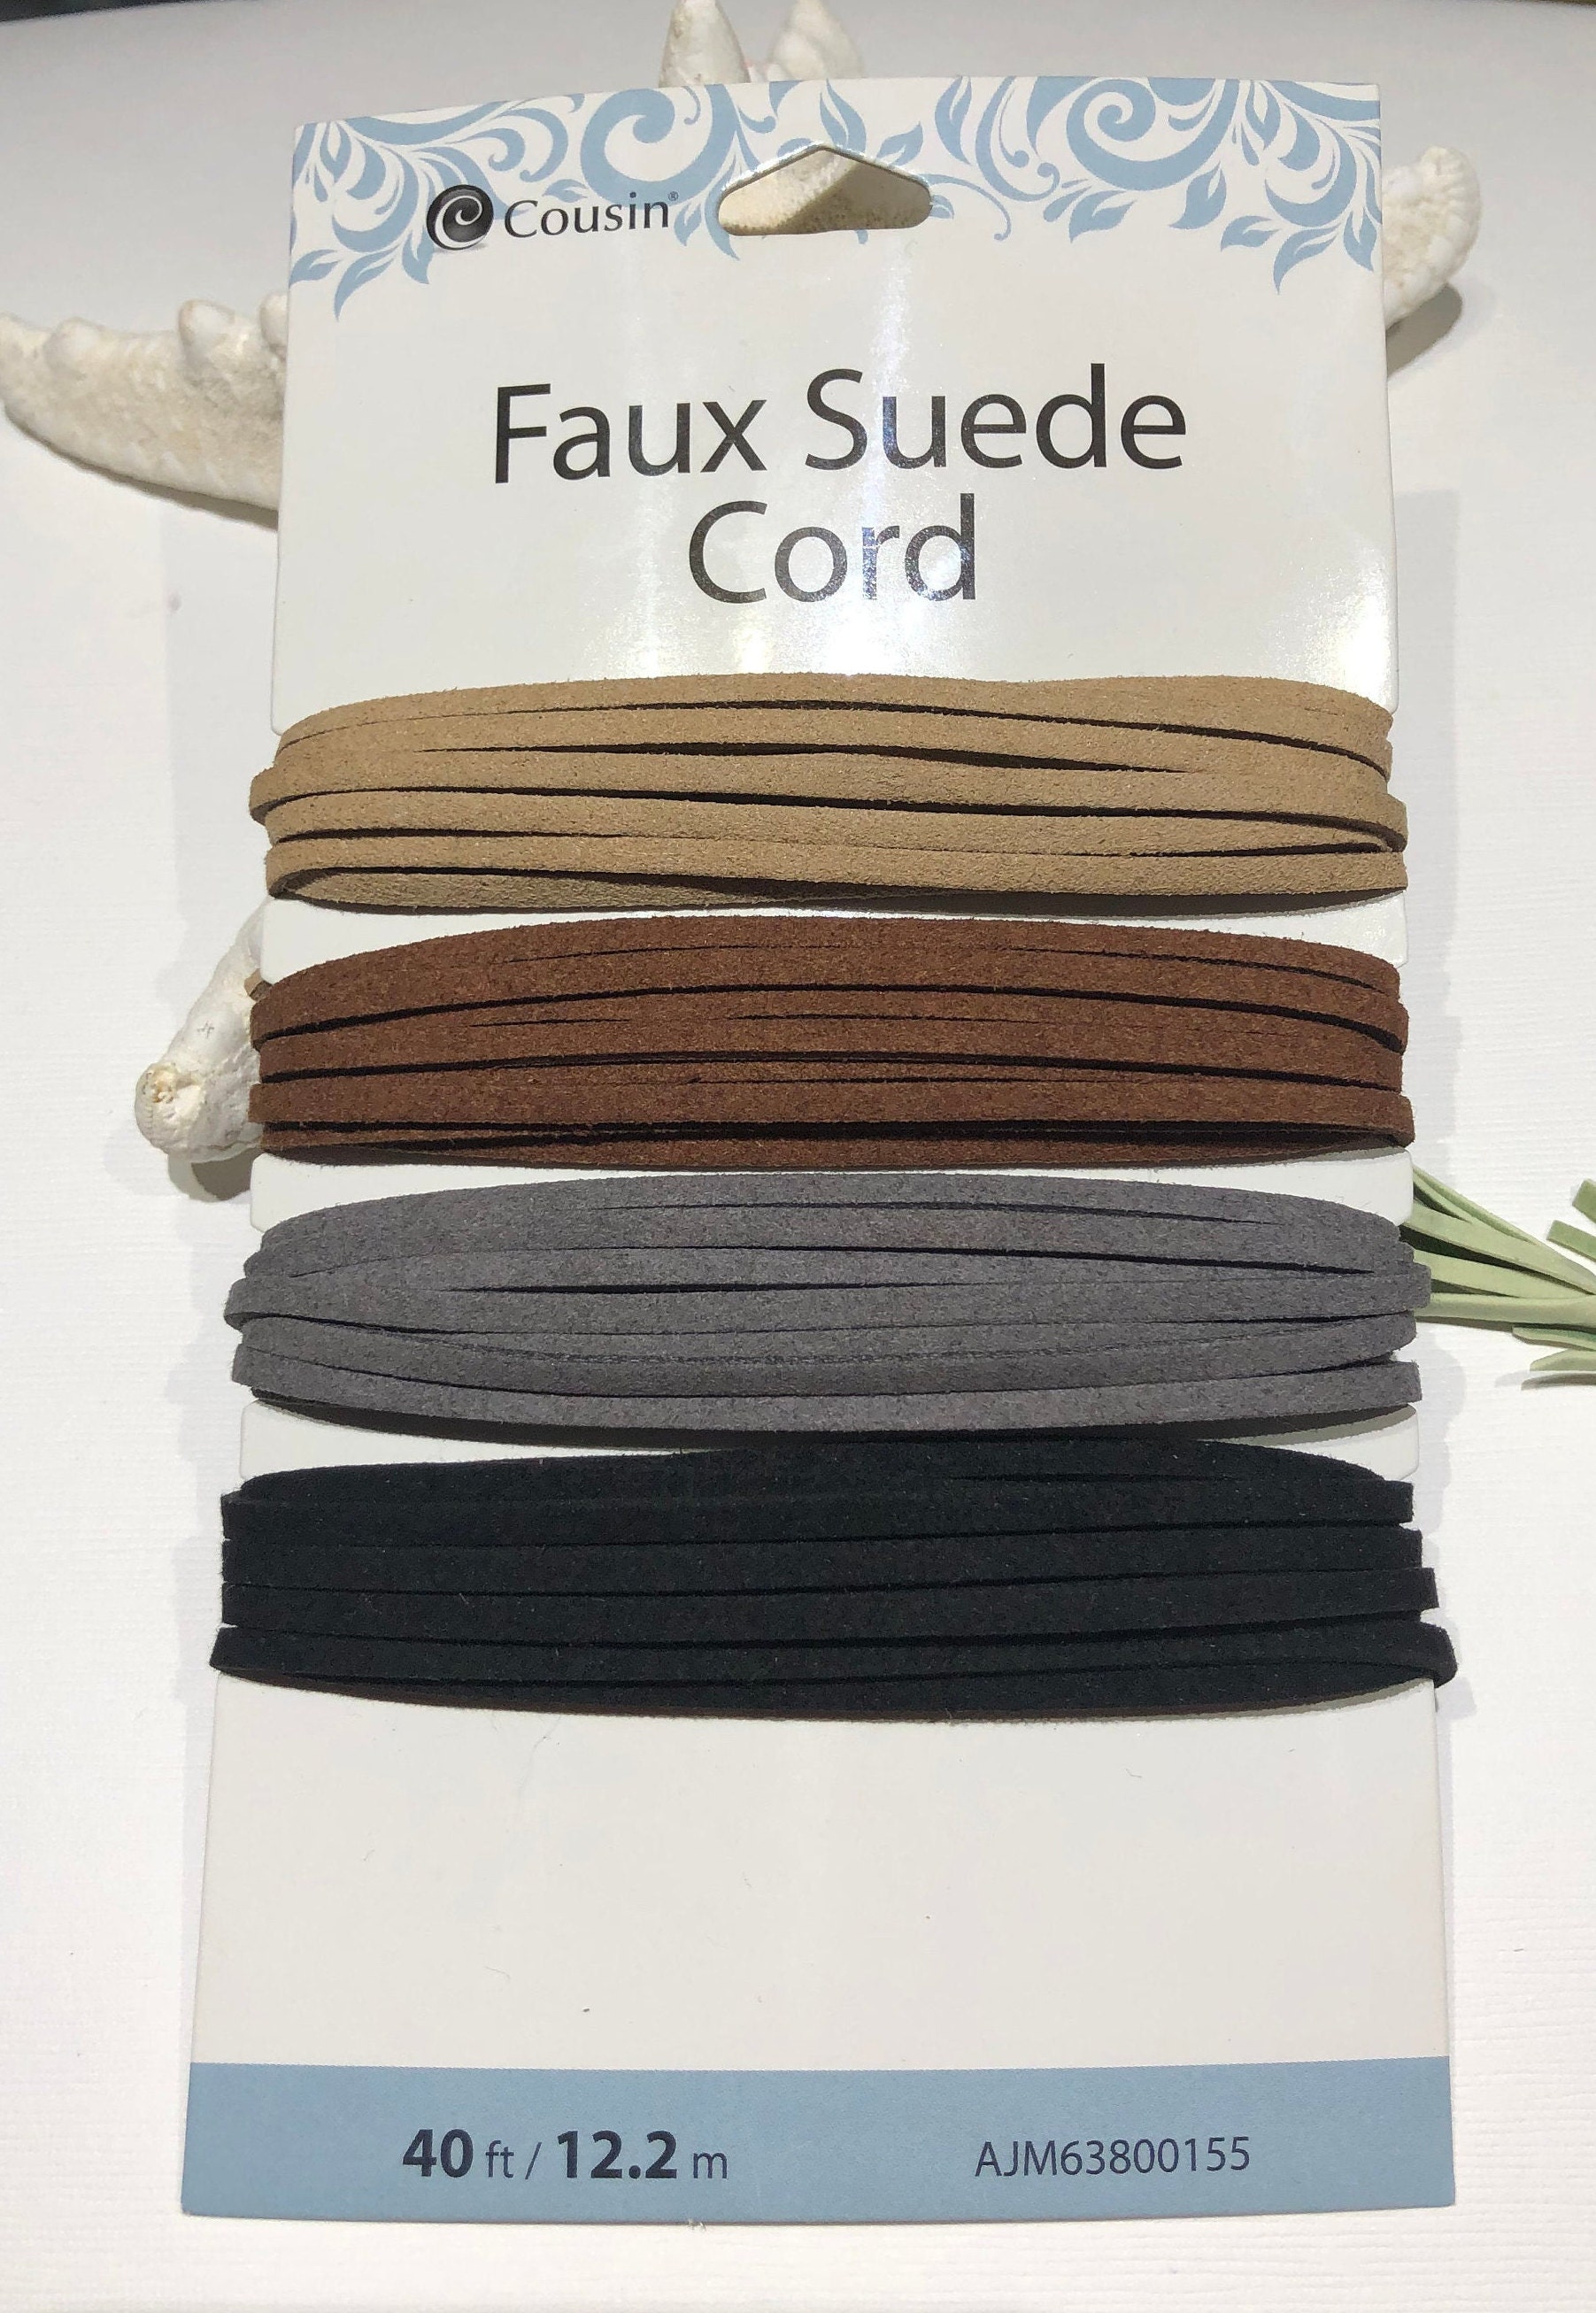 Waxed Thread, Hand Sewing Thread Round Wax Thread for Hand Sewing Leather ,  0.7mm or 1.0mm-20m Length Leather Craft Tools MLT-P0000BDE 